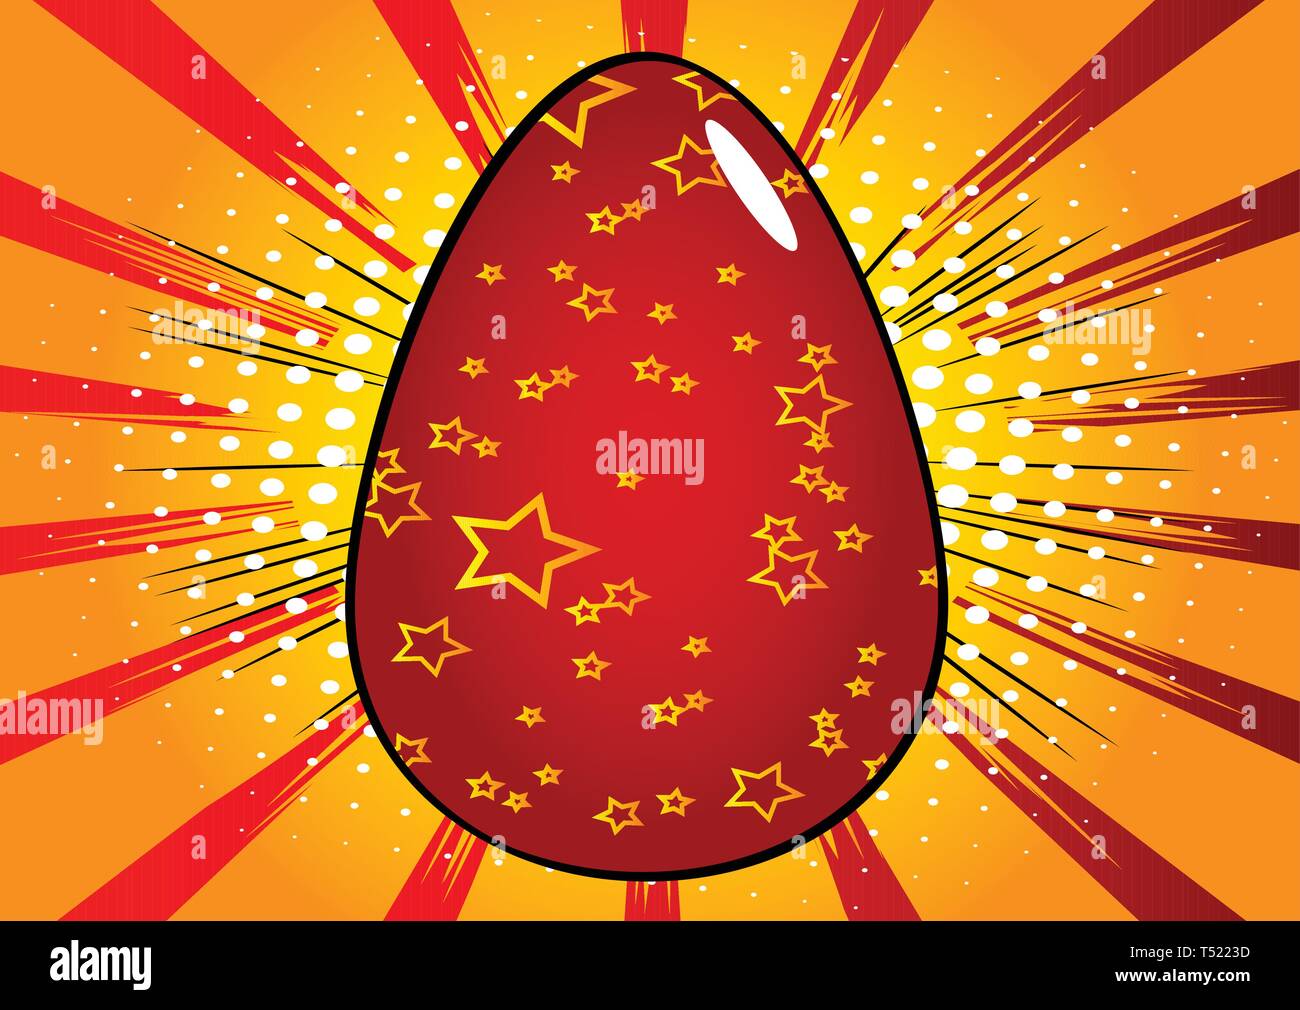 Vector cartoon red Easter egg. Illustrated holiday sign on comic book background. Stock Vector